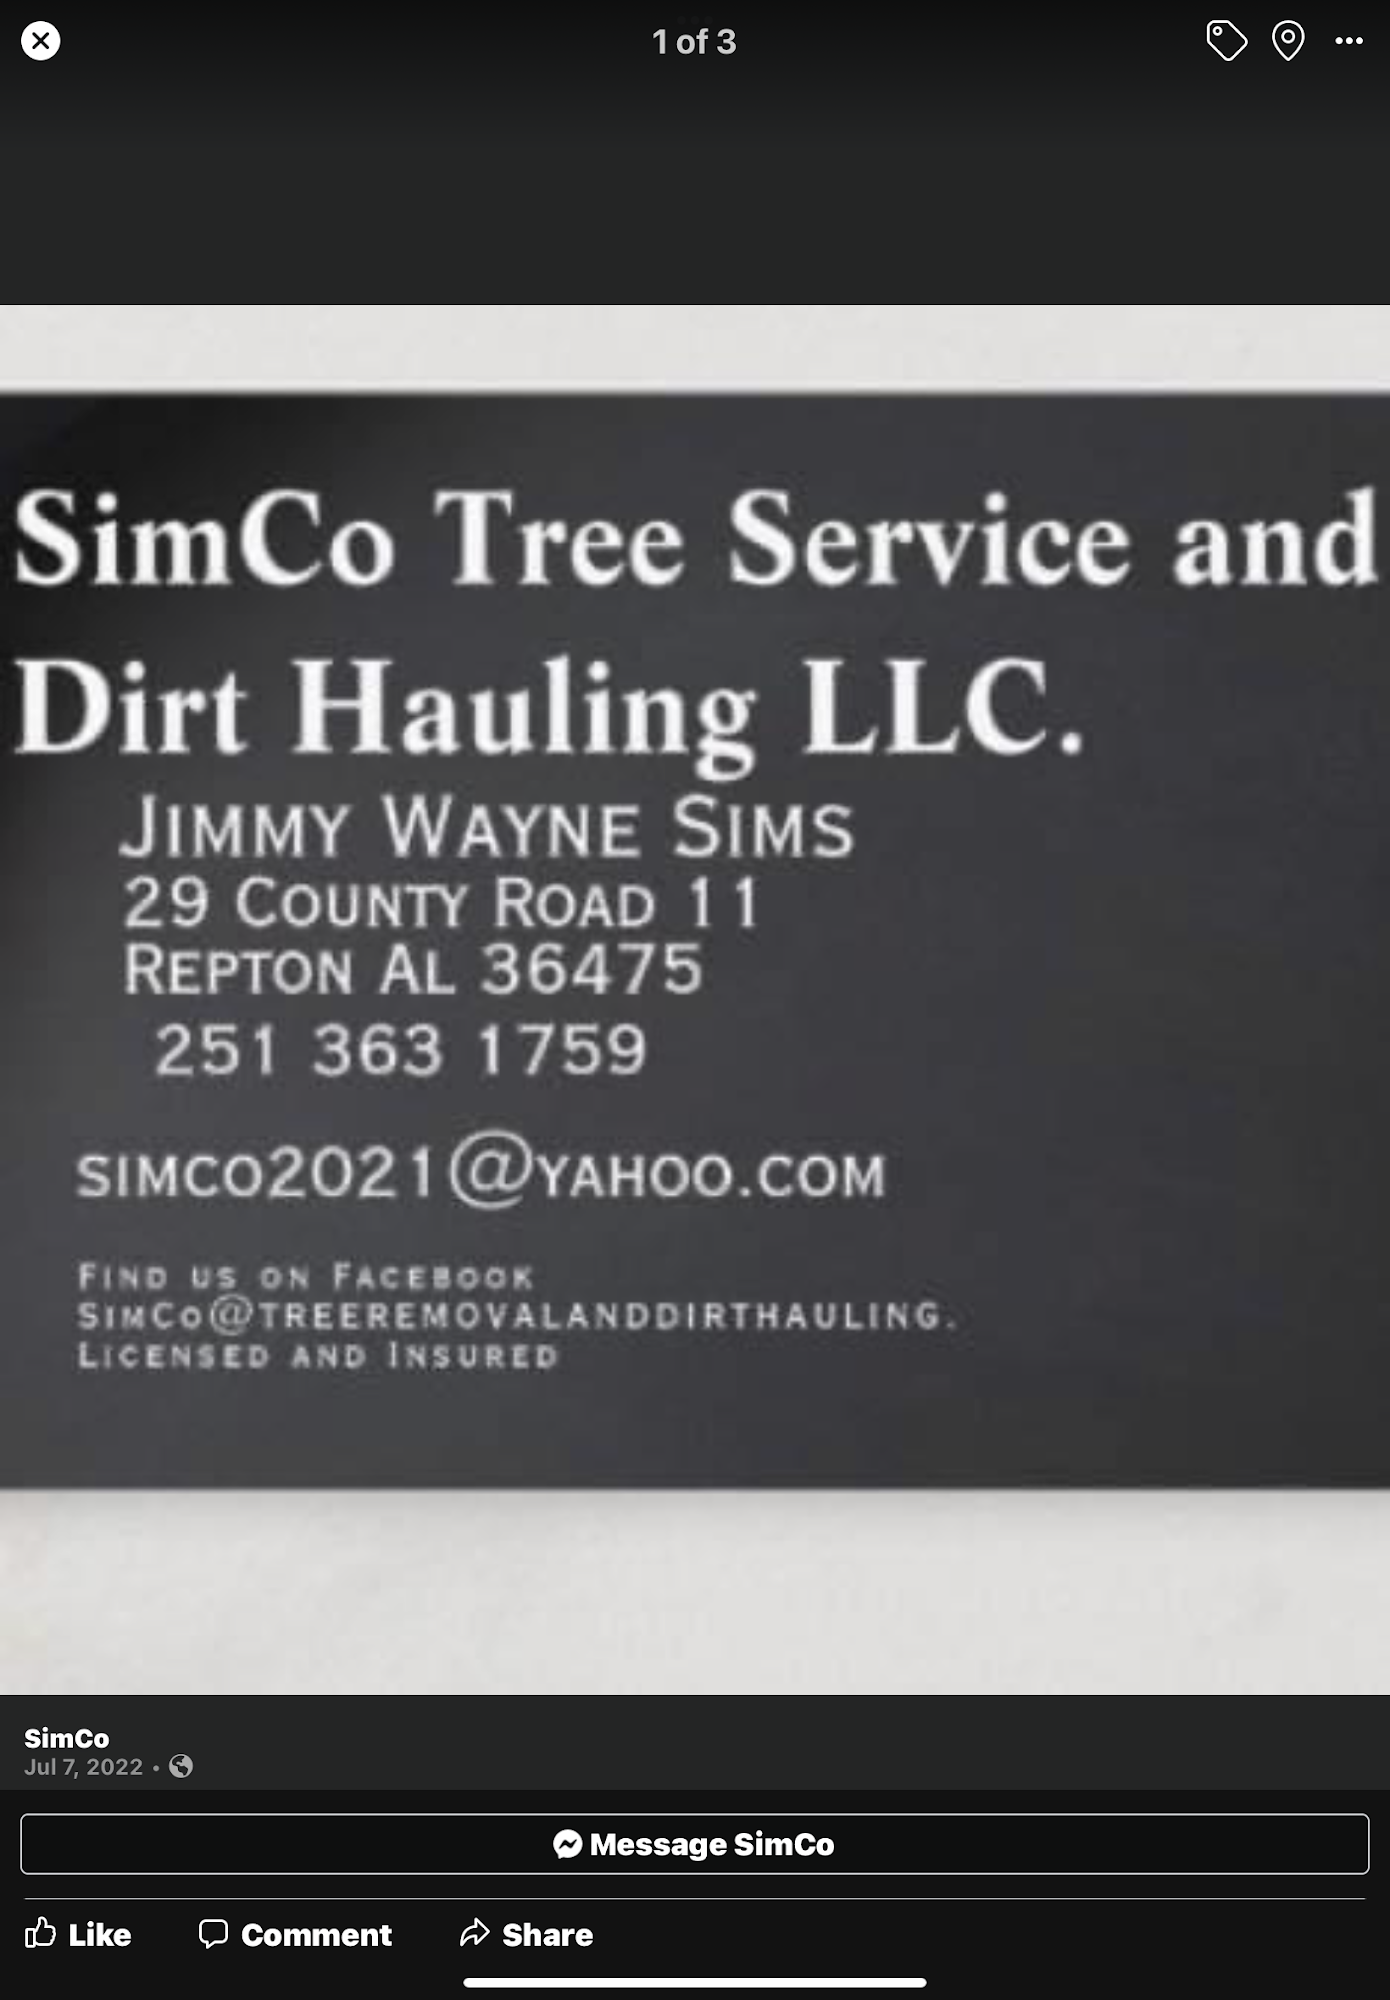 SimCo Tree Service and Dirt Hauling LLC. 29 Co Hwy 11, Repton Alabama 36475